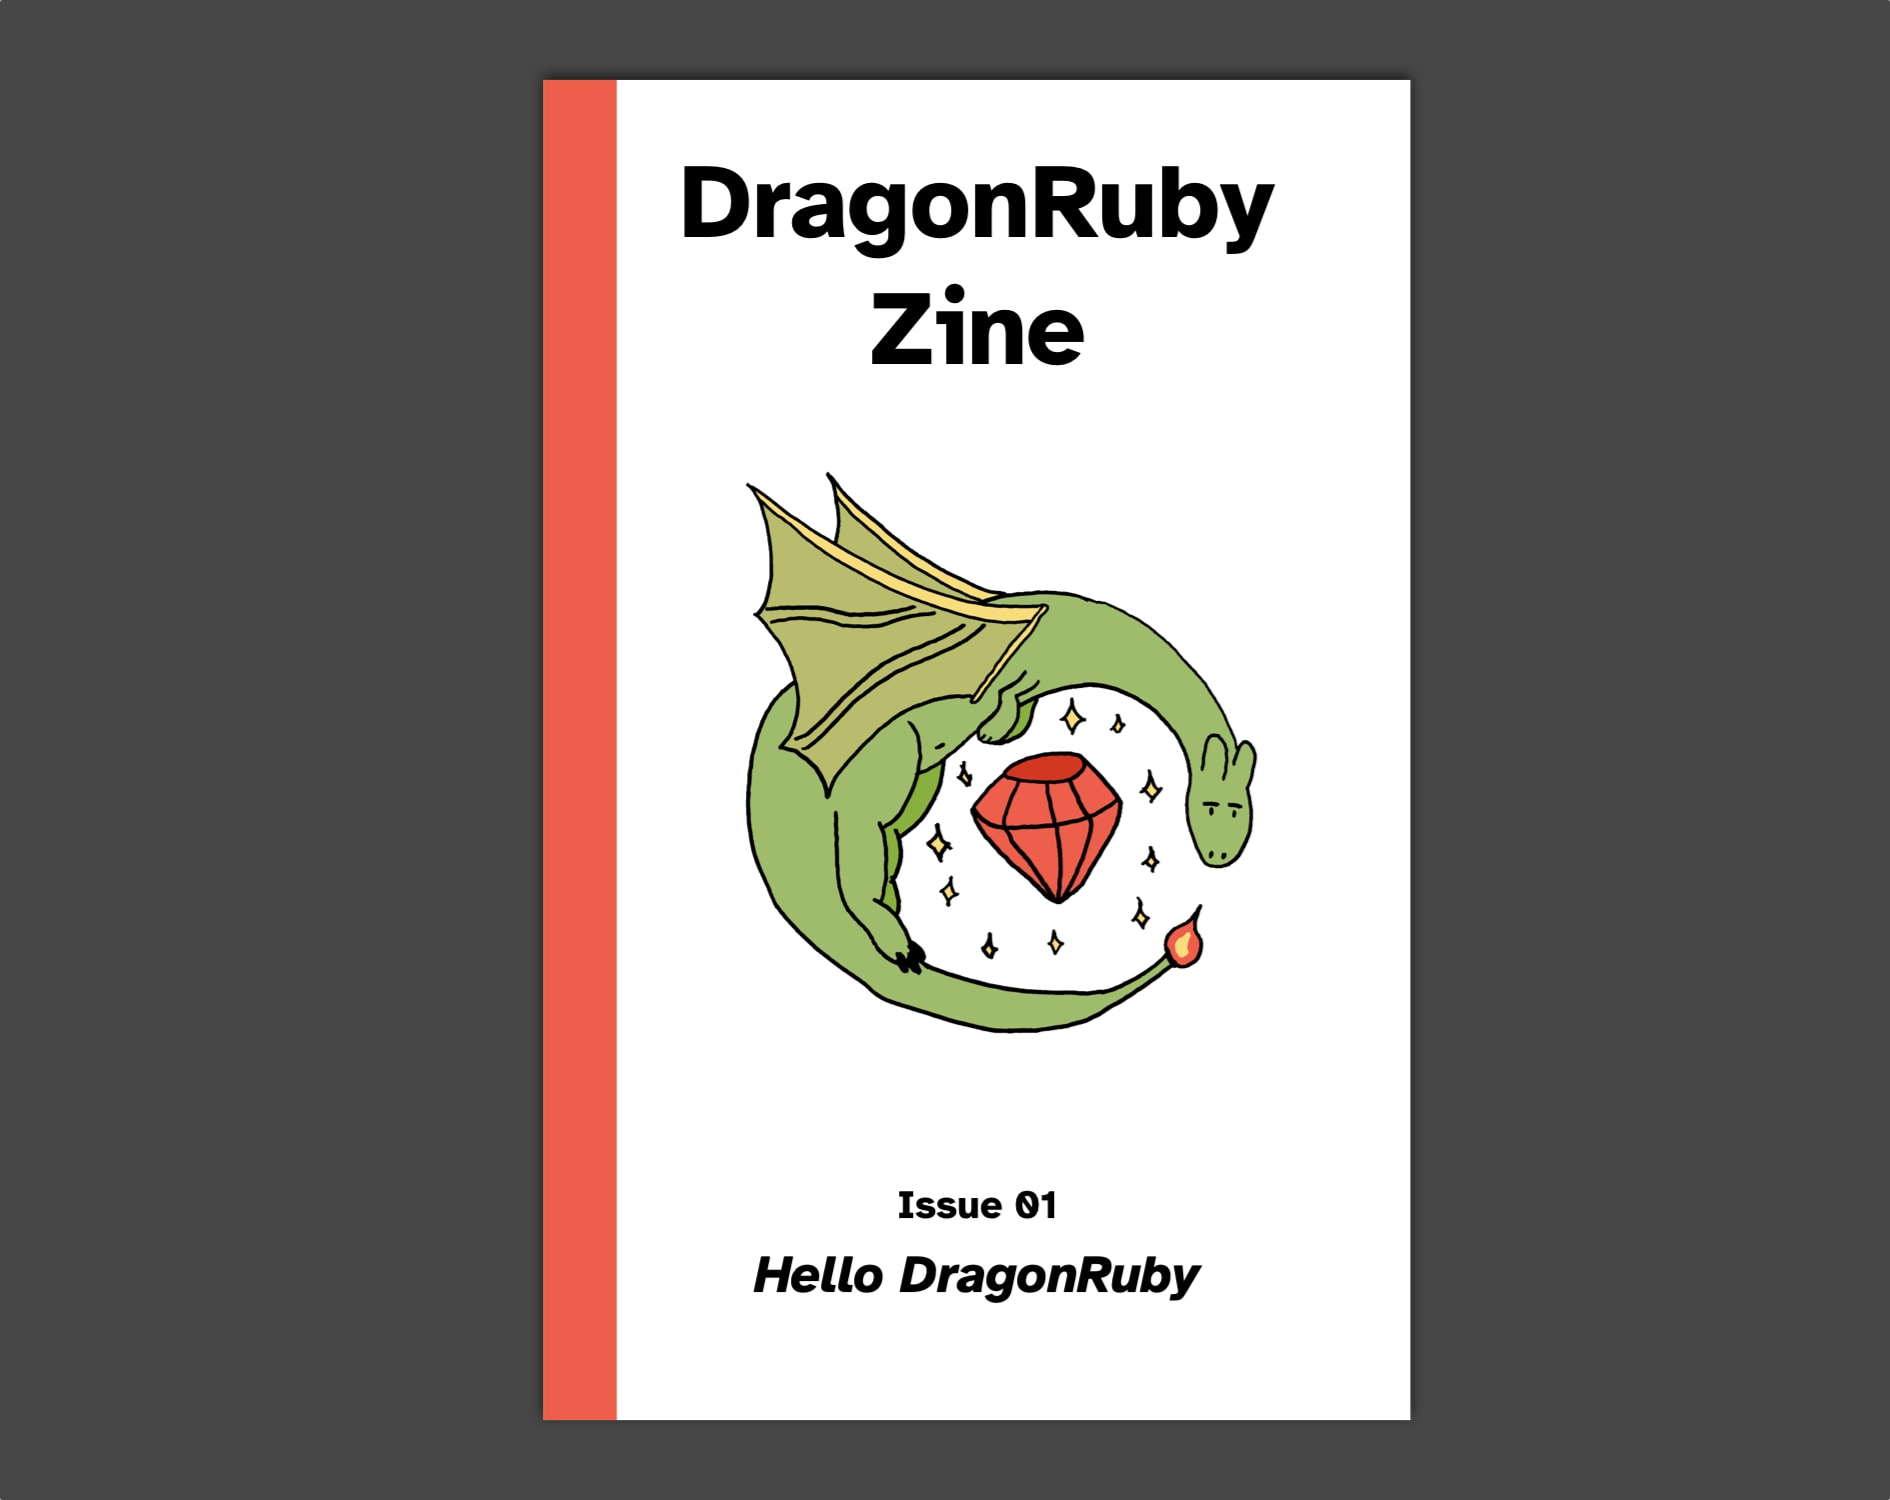 cover of the DragonRuby zine issue 1, featuring a green dragon encircling a sparkling red gem